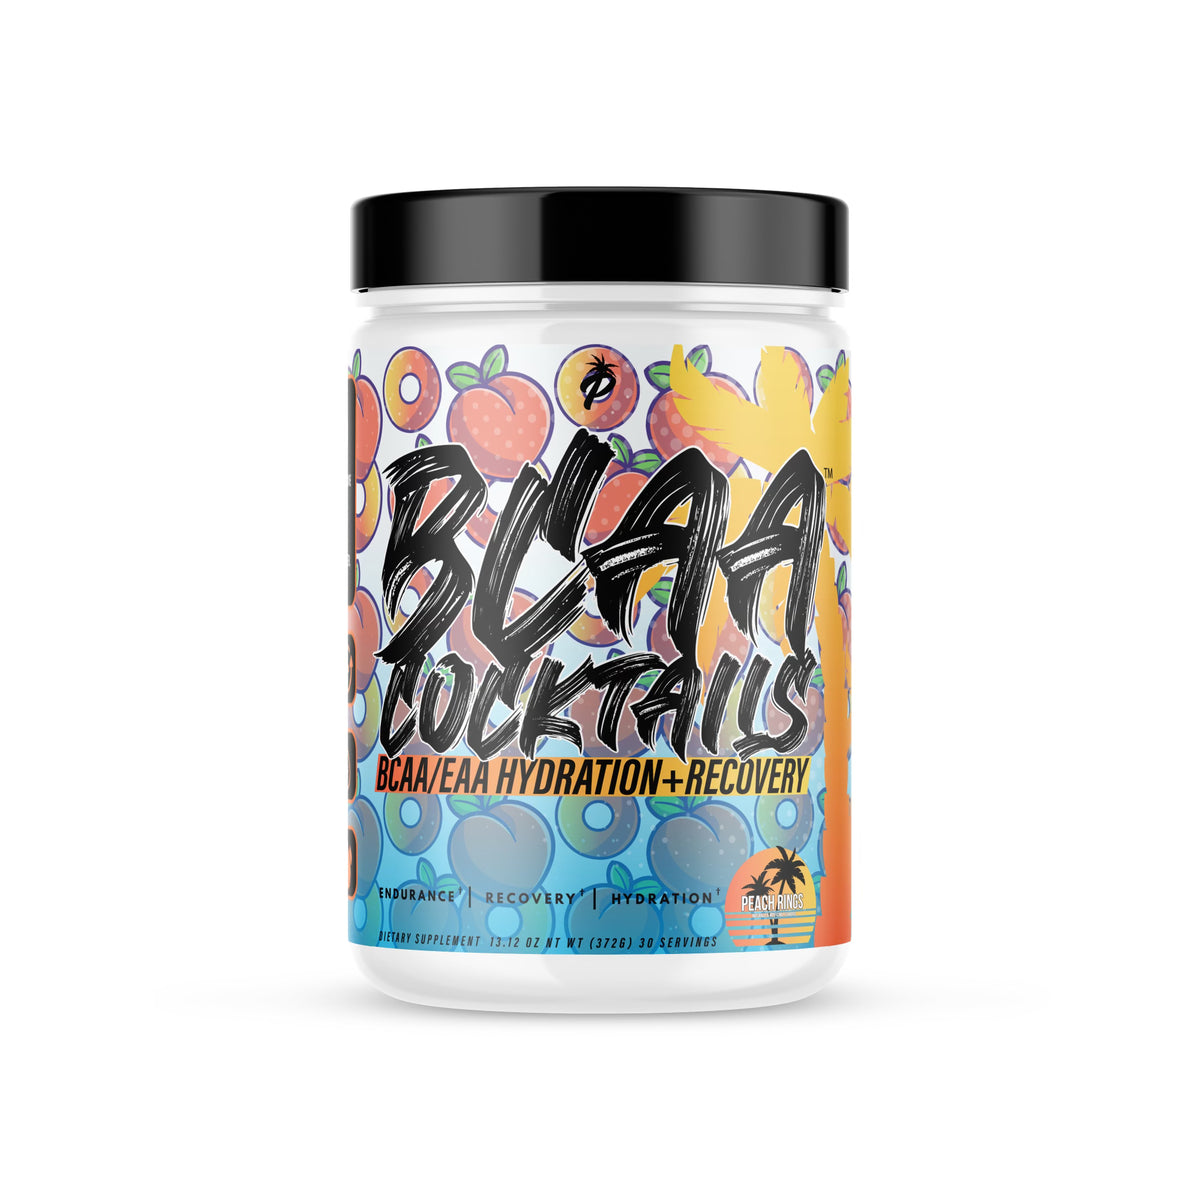 BCAA/EAA COCKTAILS | Superior Hydration + Recovery